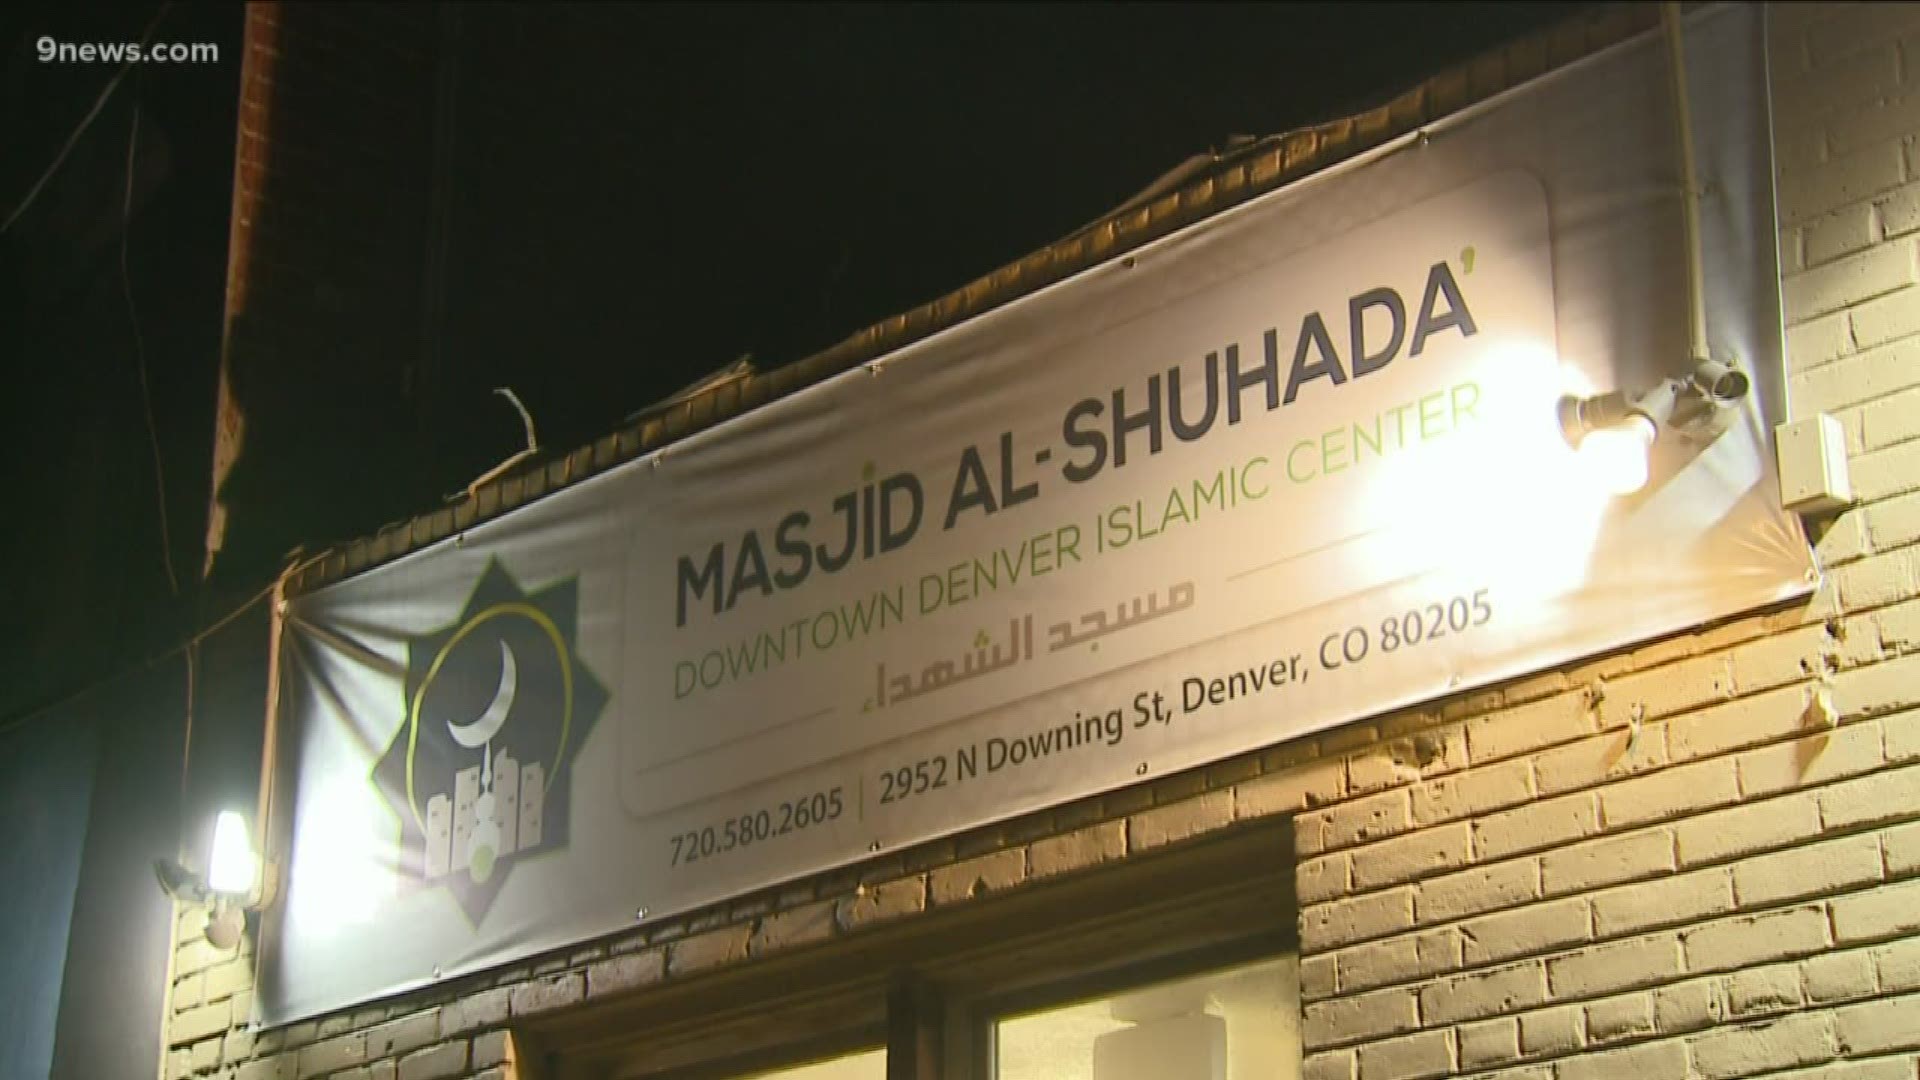 The Denver Police Department is investigating the incident, and as a precaution is increasing patrols around Denver mosques.